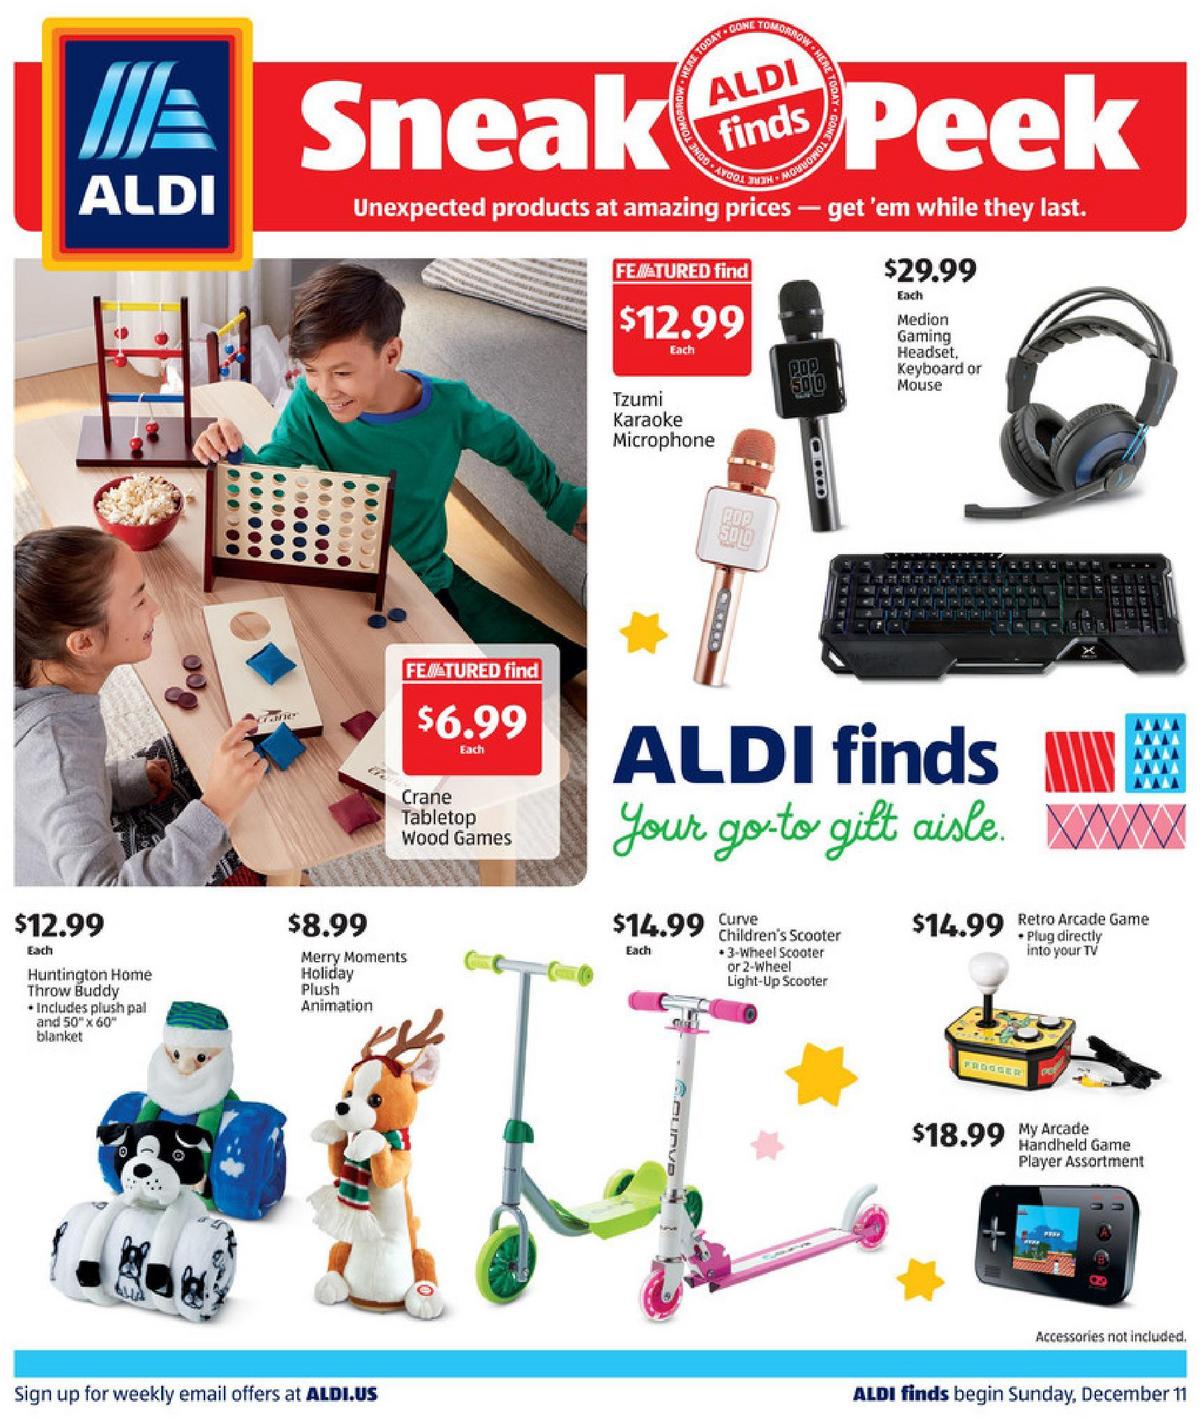 ALDI In Store Ad Weekly Ad from December 13